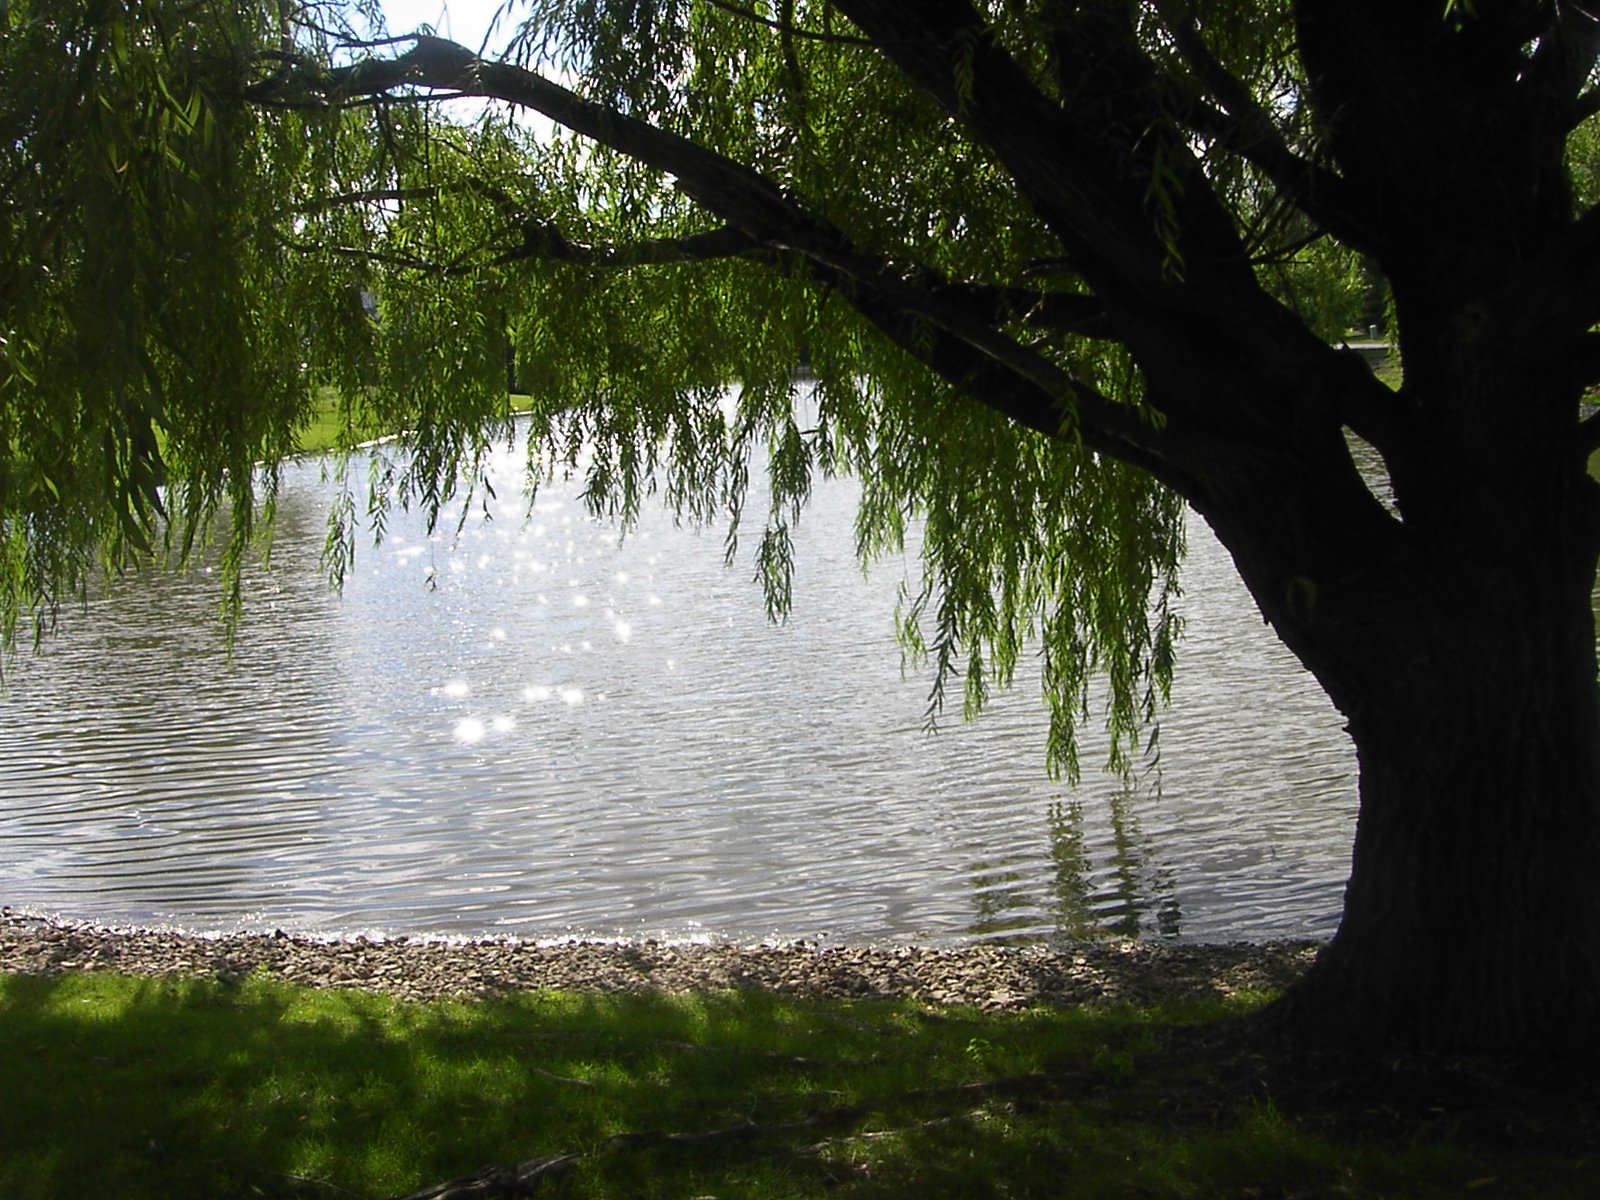 willow wallpaper,body of water,nature,tree,water,natural landscape